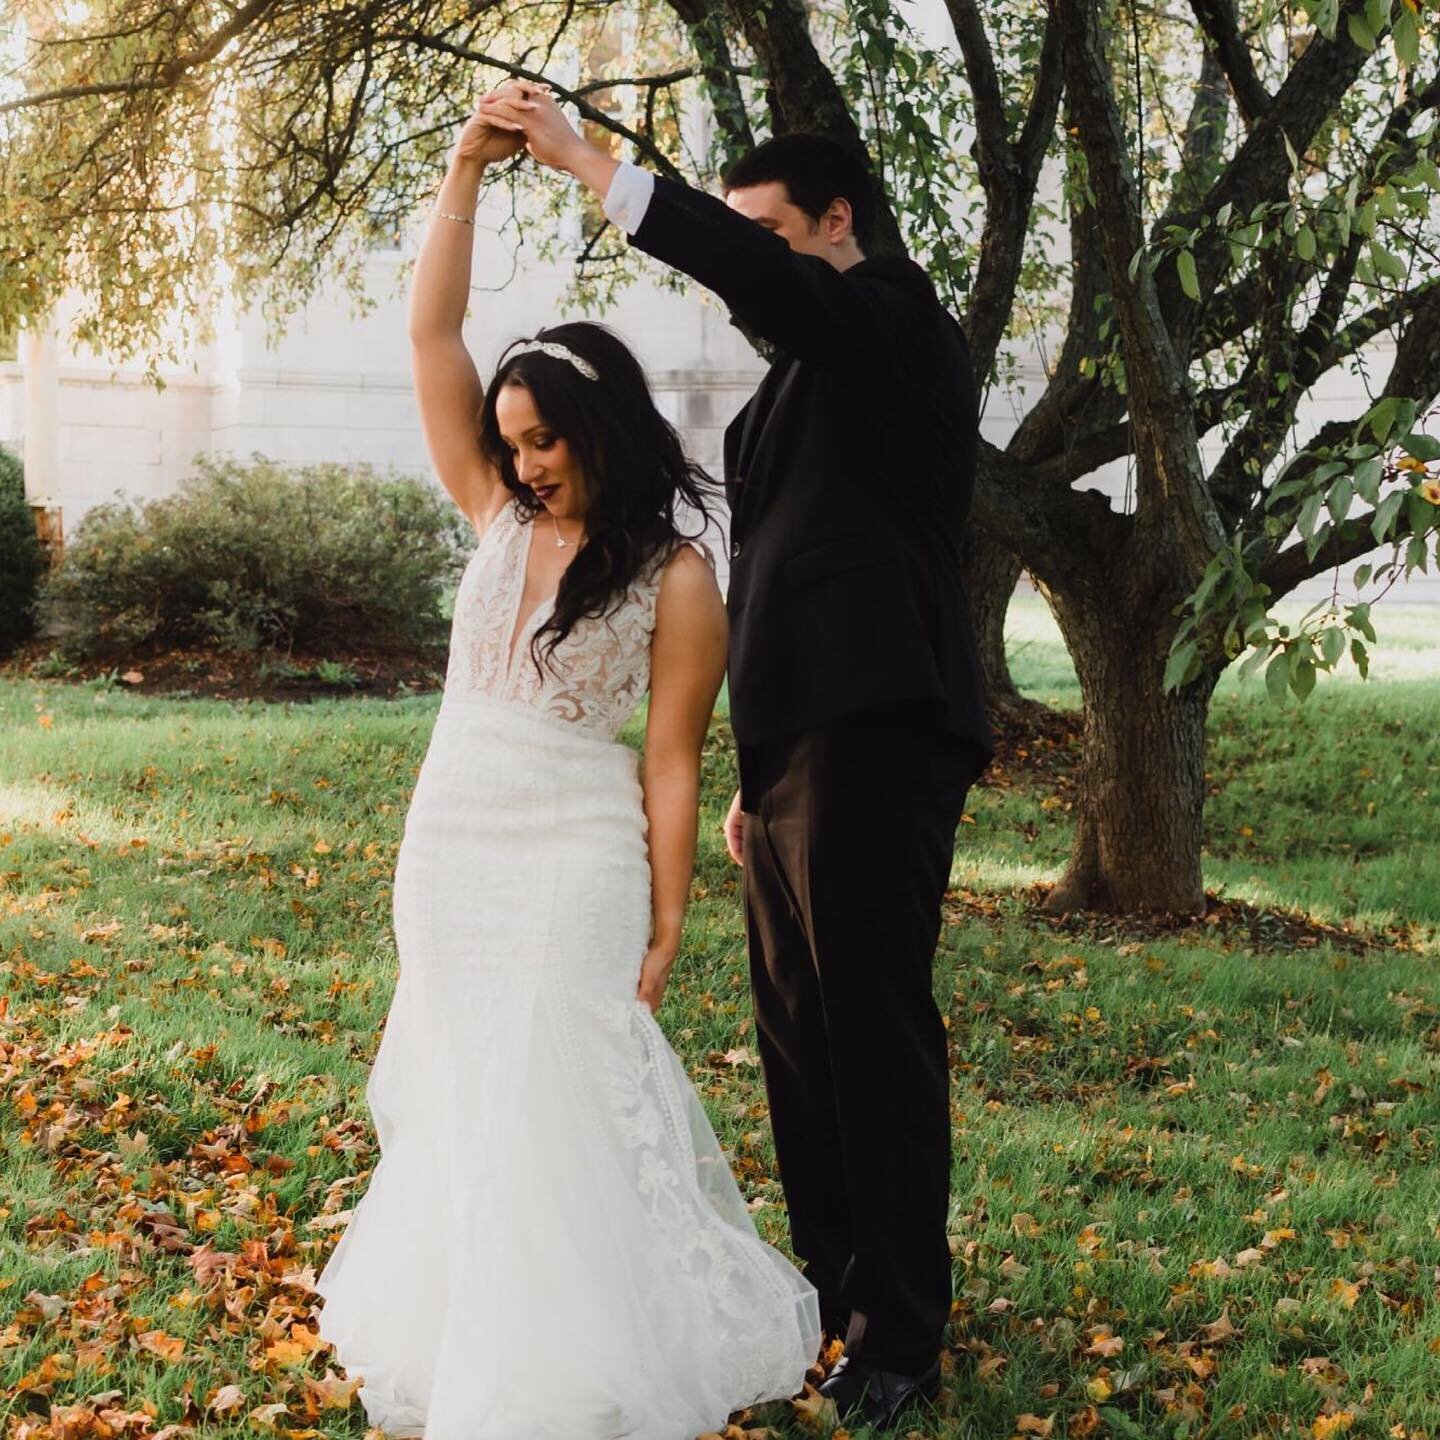 I simply love these beautiful photos of Kiara + David on their perfect October wedding day! The wedding took place at a gorgeous library in Connecticut, which was perfect because Kiara &amp; David both love reading! I will absolutely be sharing more 